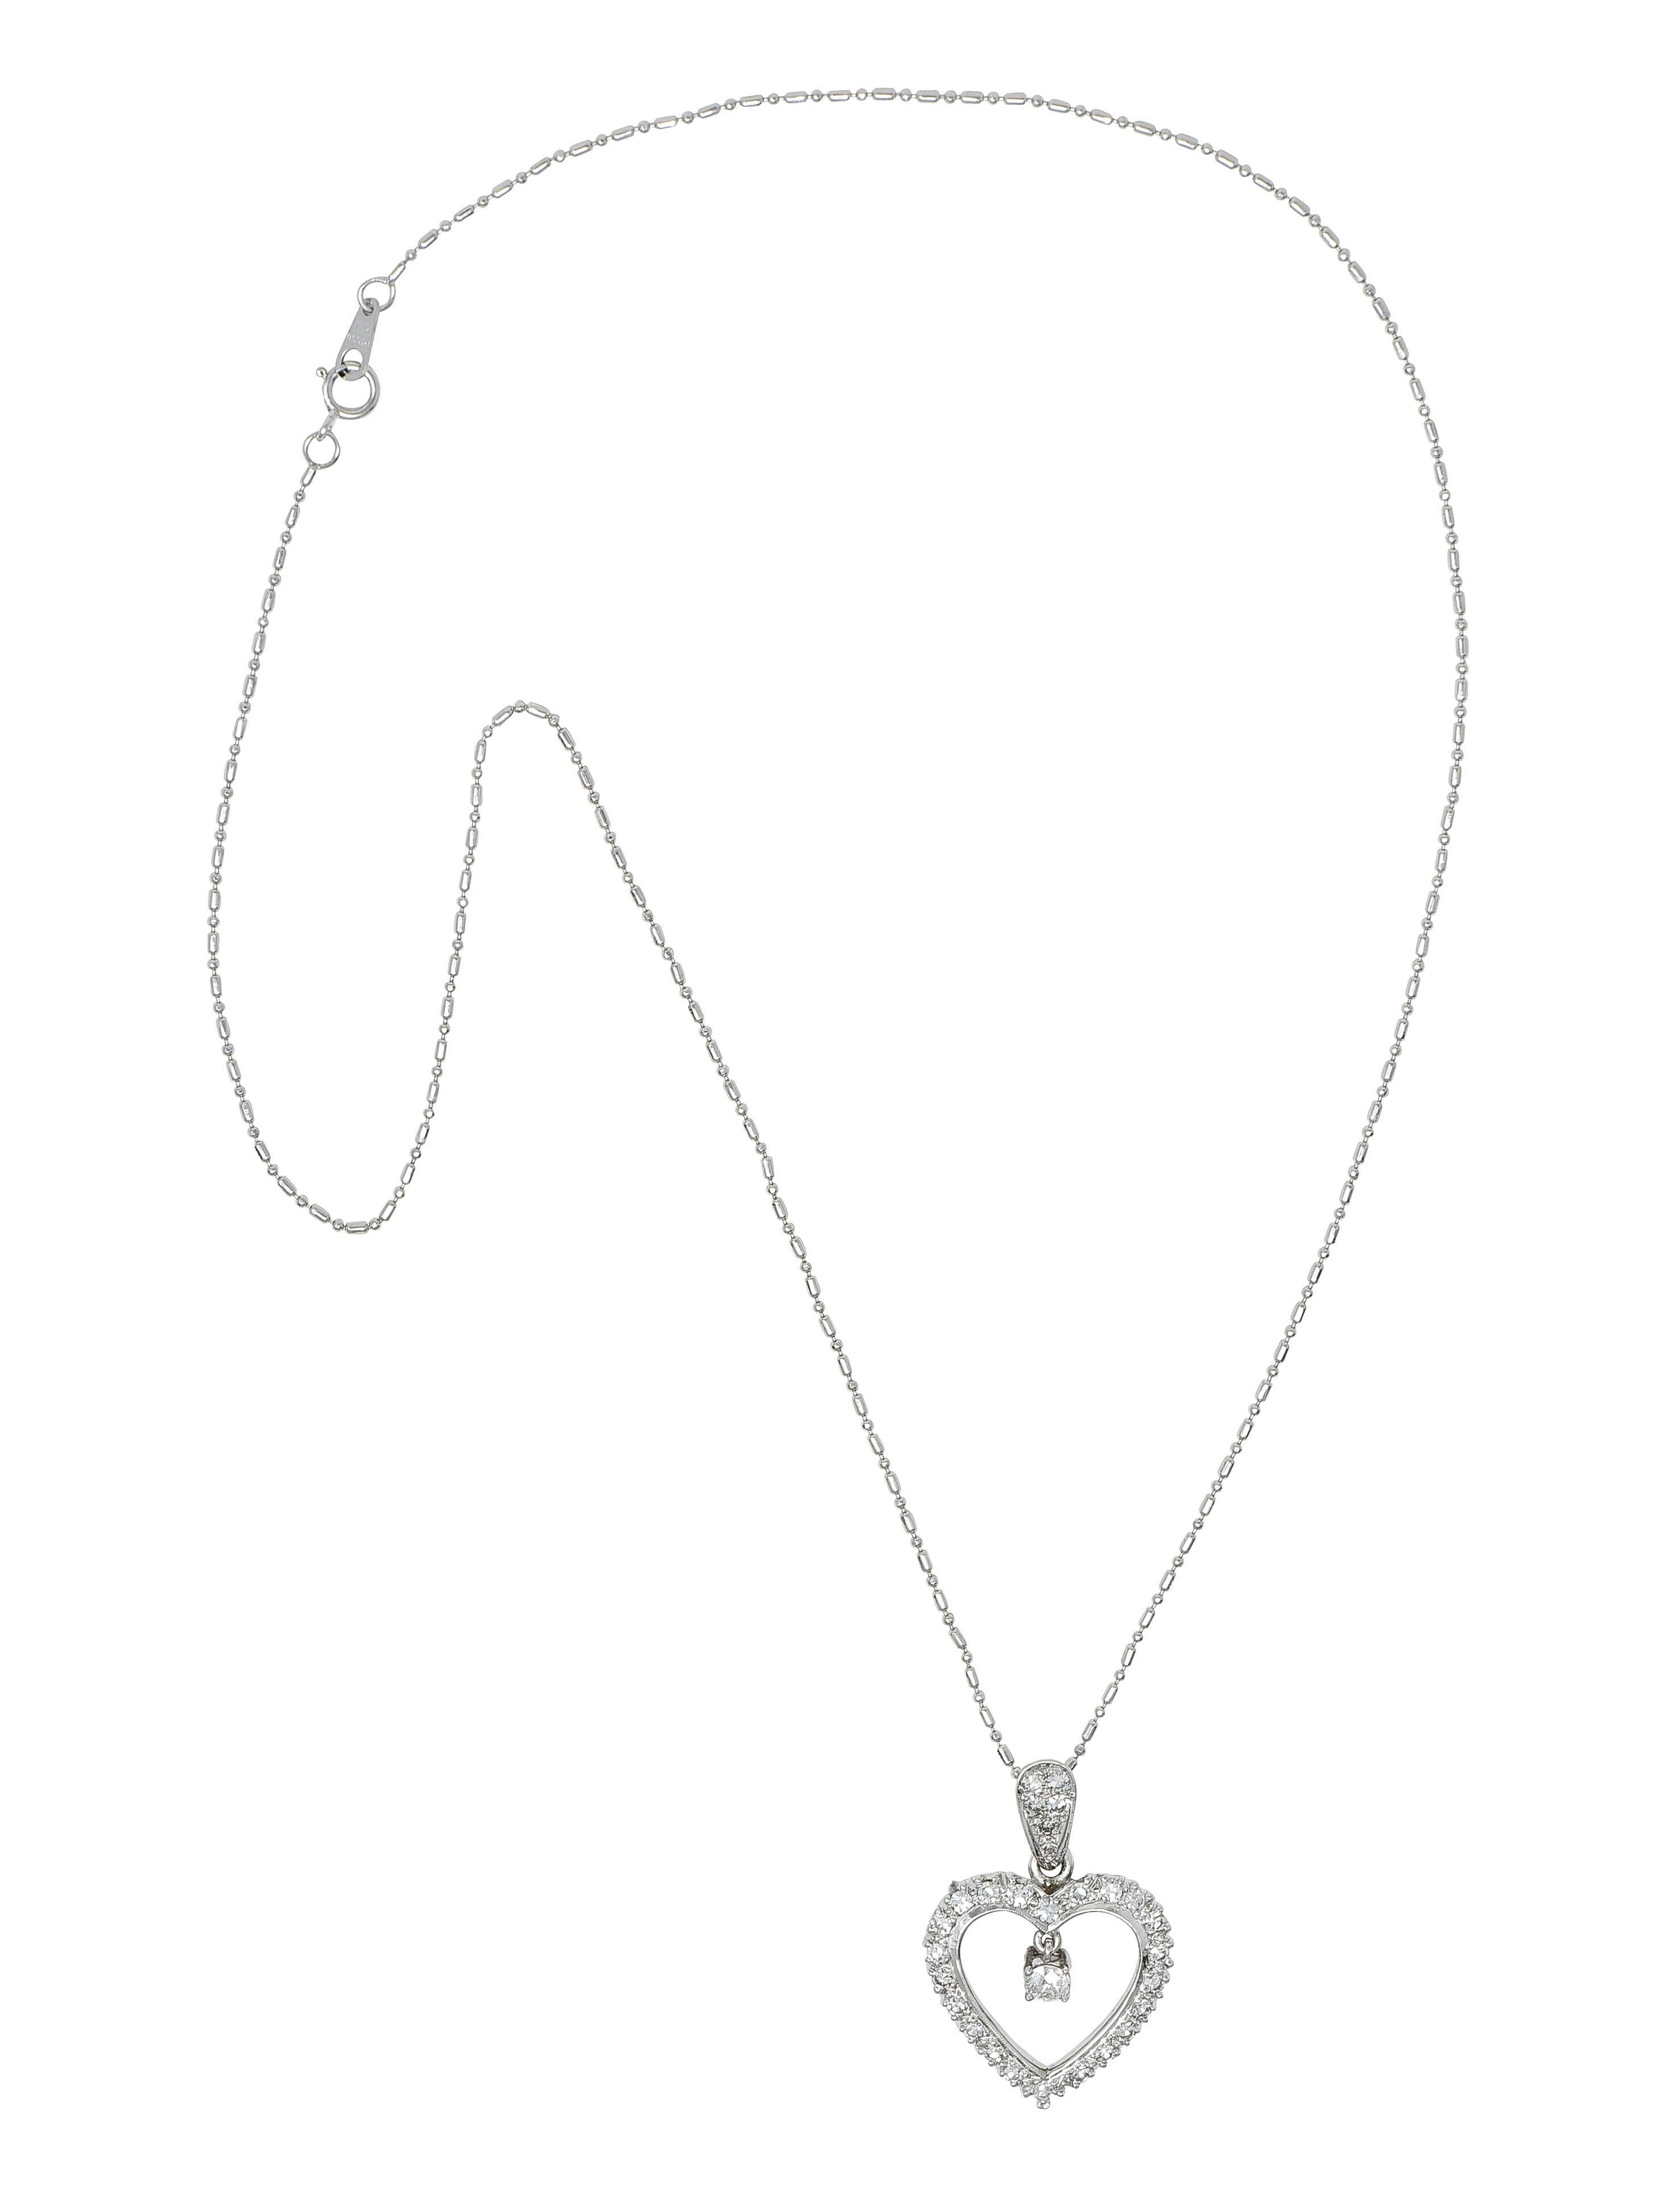 Designed as a 1.0 mm bead chain suspending a heart-shaped pendant from pear-shaped bale 
Centering an old European cut diamond weighing approximately 0.24 carat 
G color with VS2 clarity - prong set in basket as articulating drop 
With additional